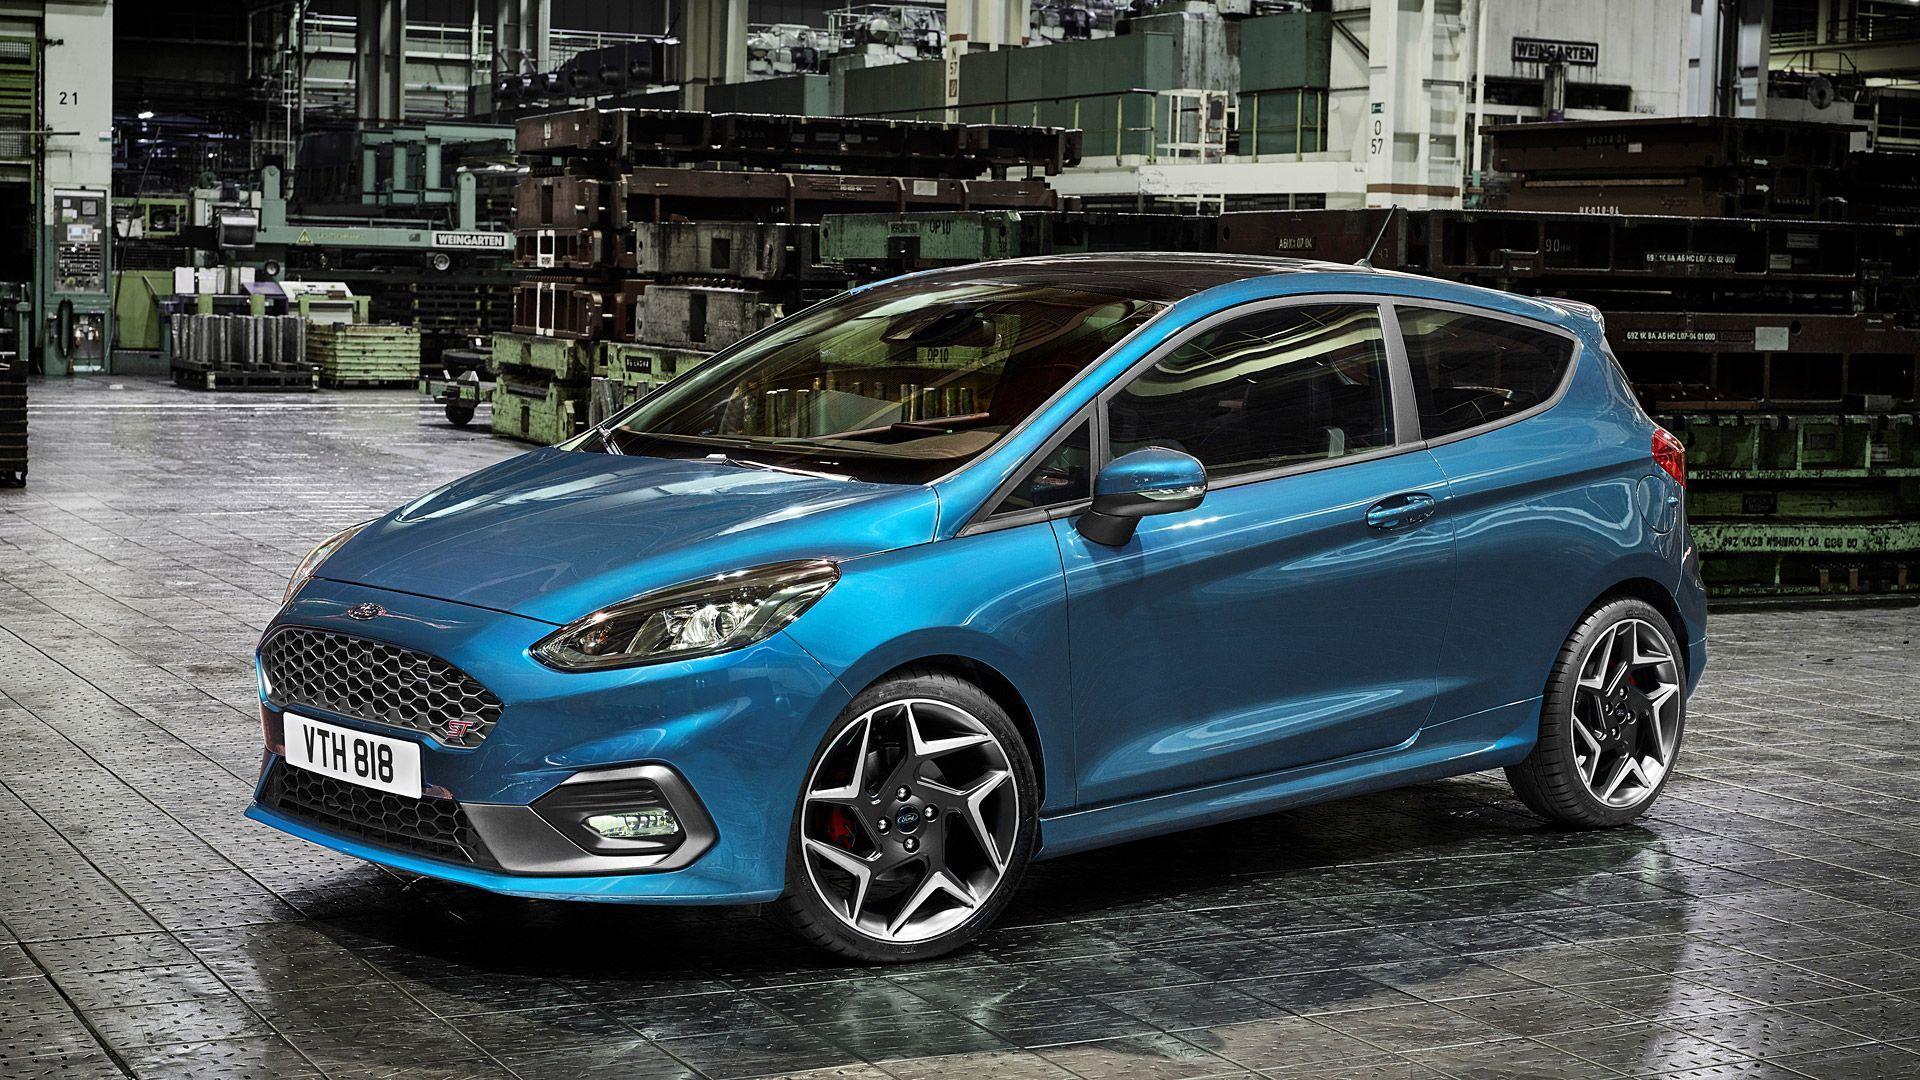 25+ Ford Focus St With Spoiler Wallpaper full HD